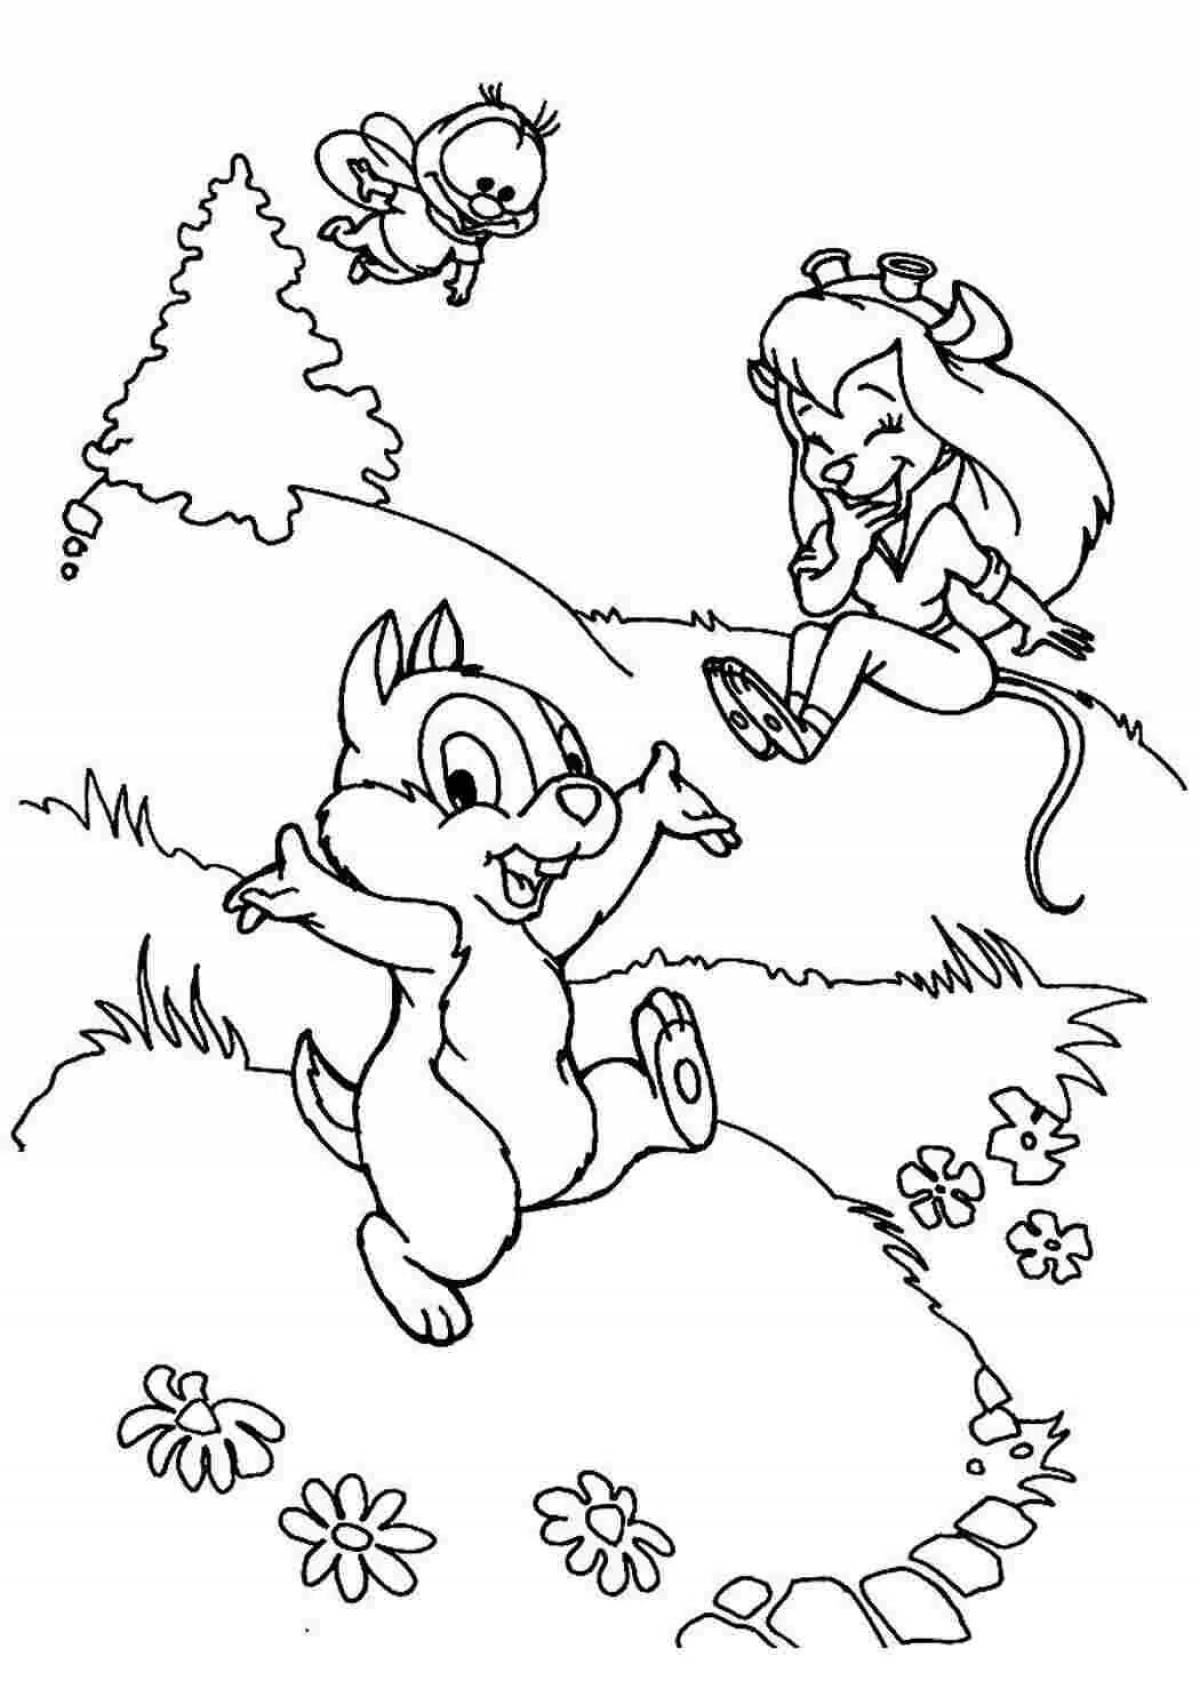 Exquisite chip and dale coloring book for kids